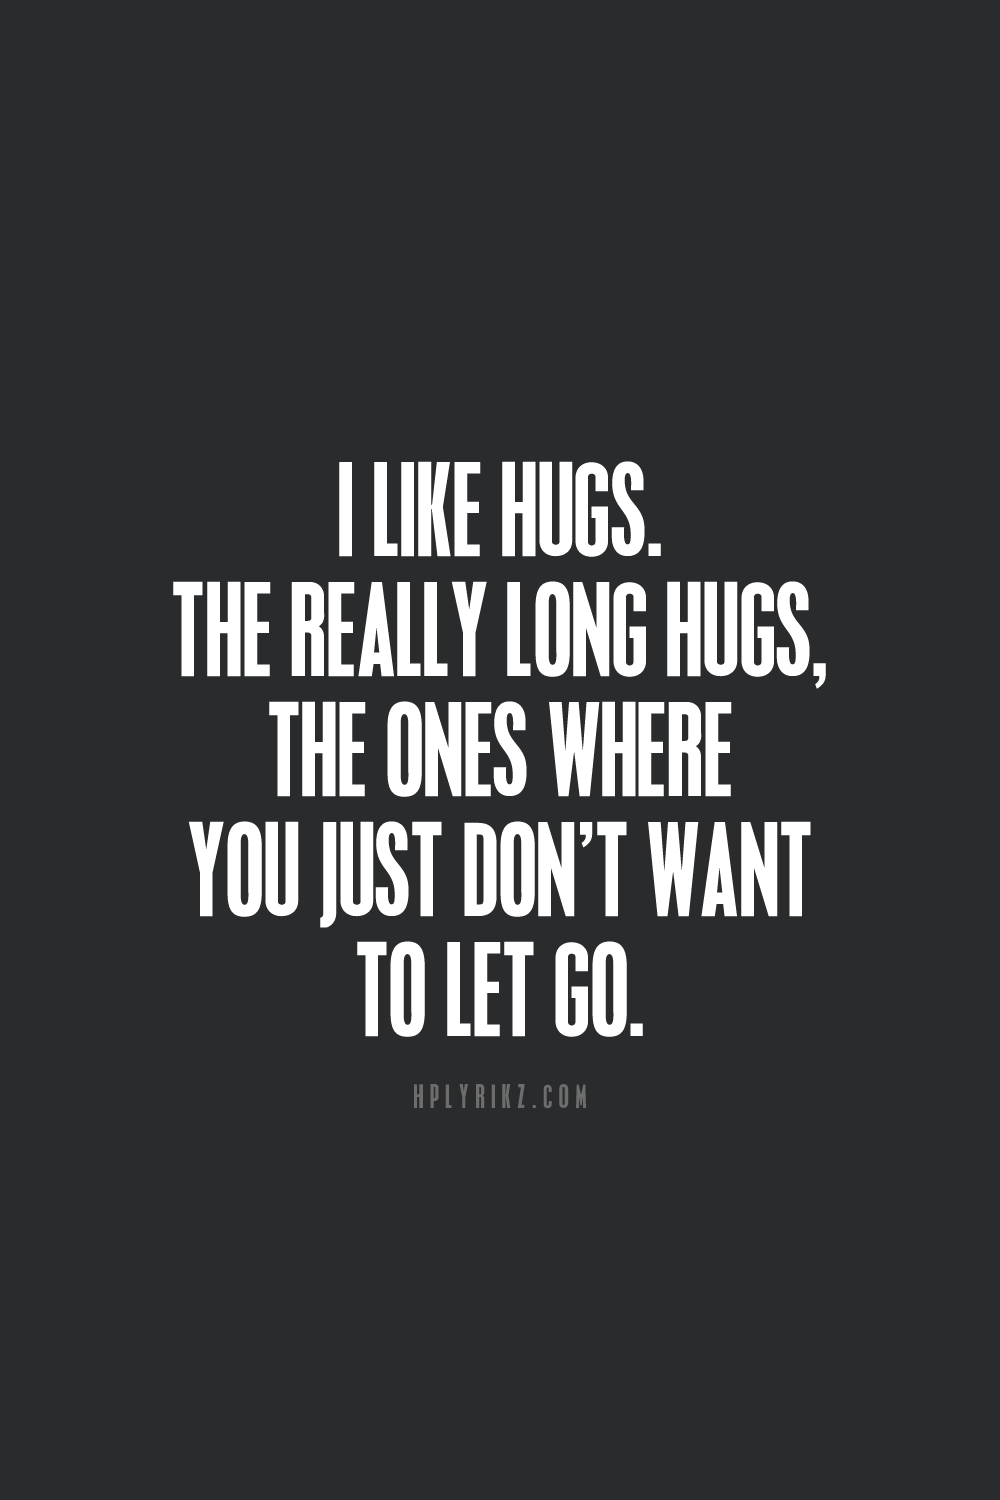 i like hugs. the really long hugs, the ones where you just don’t want to let go.